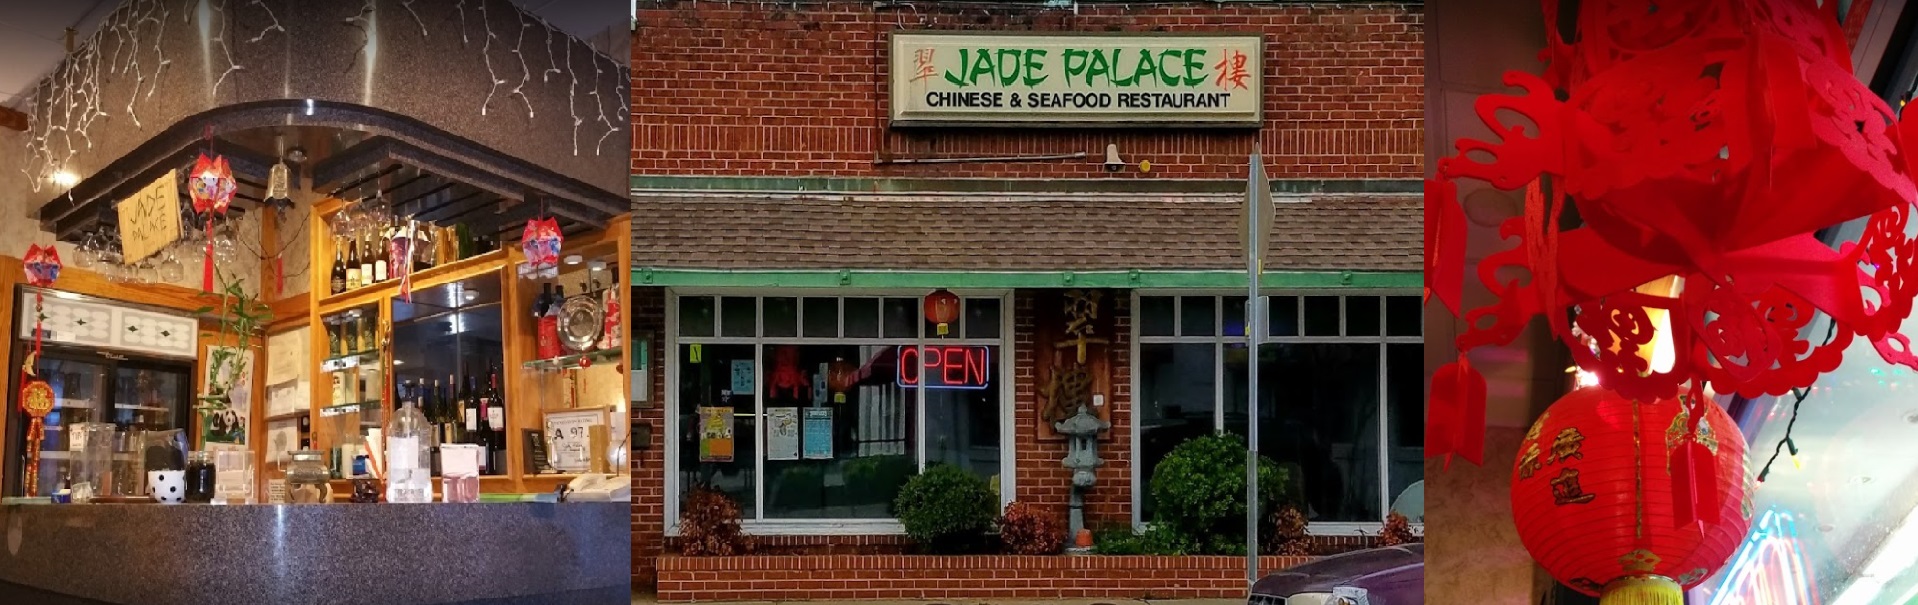 Your favorite Chinese food at Jade Palace Restaurant